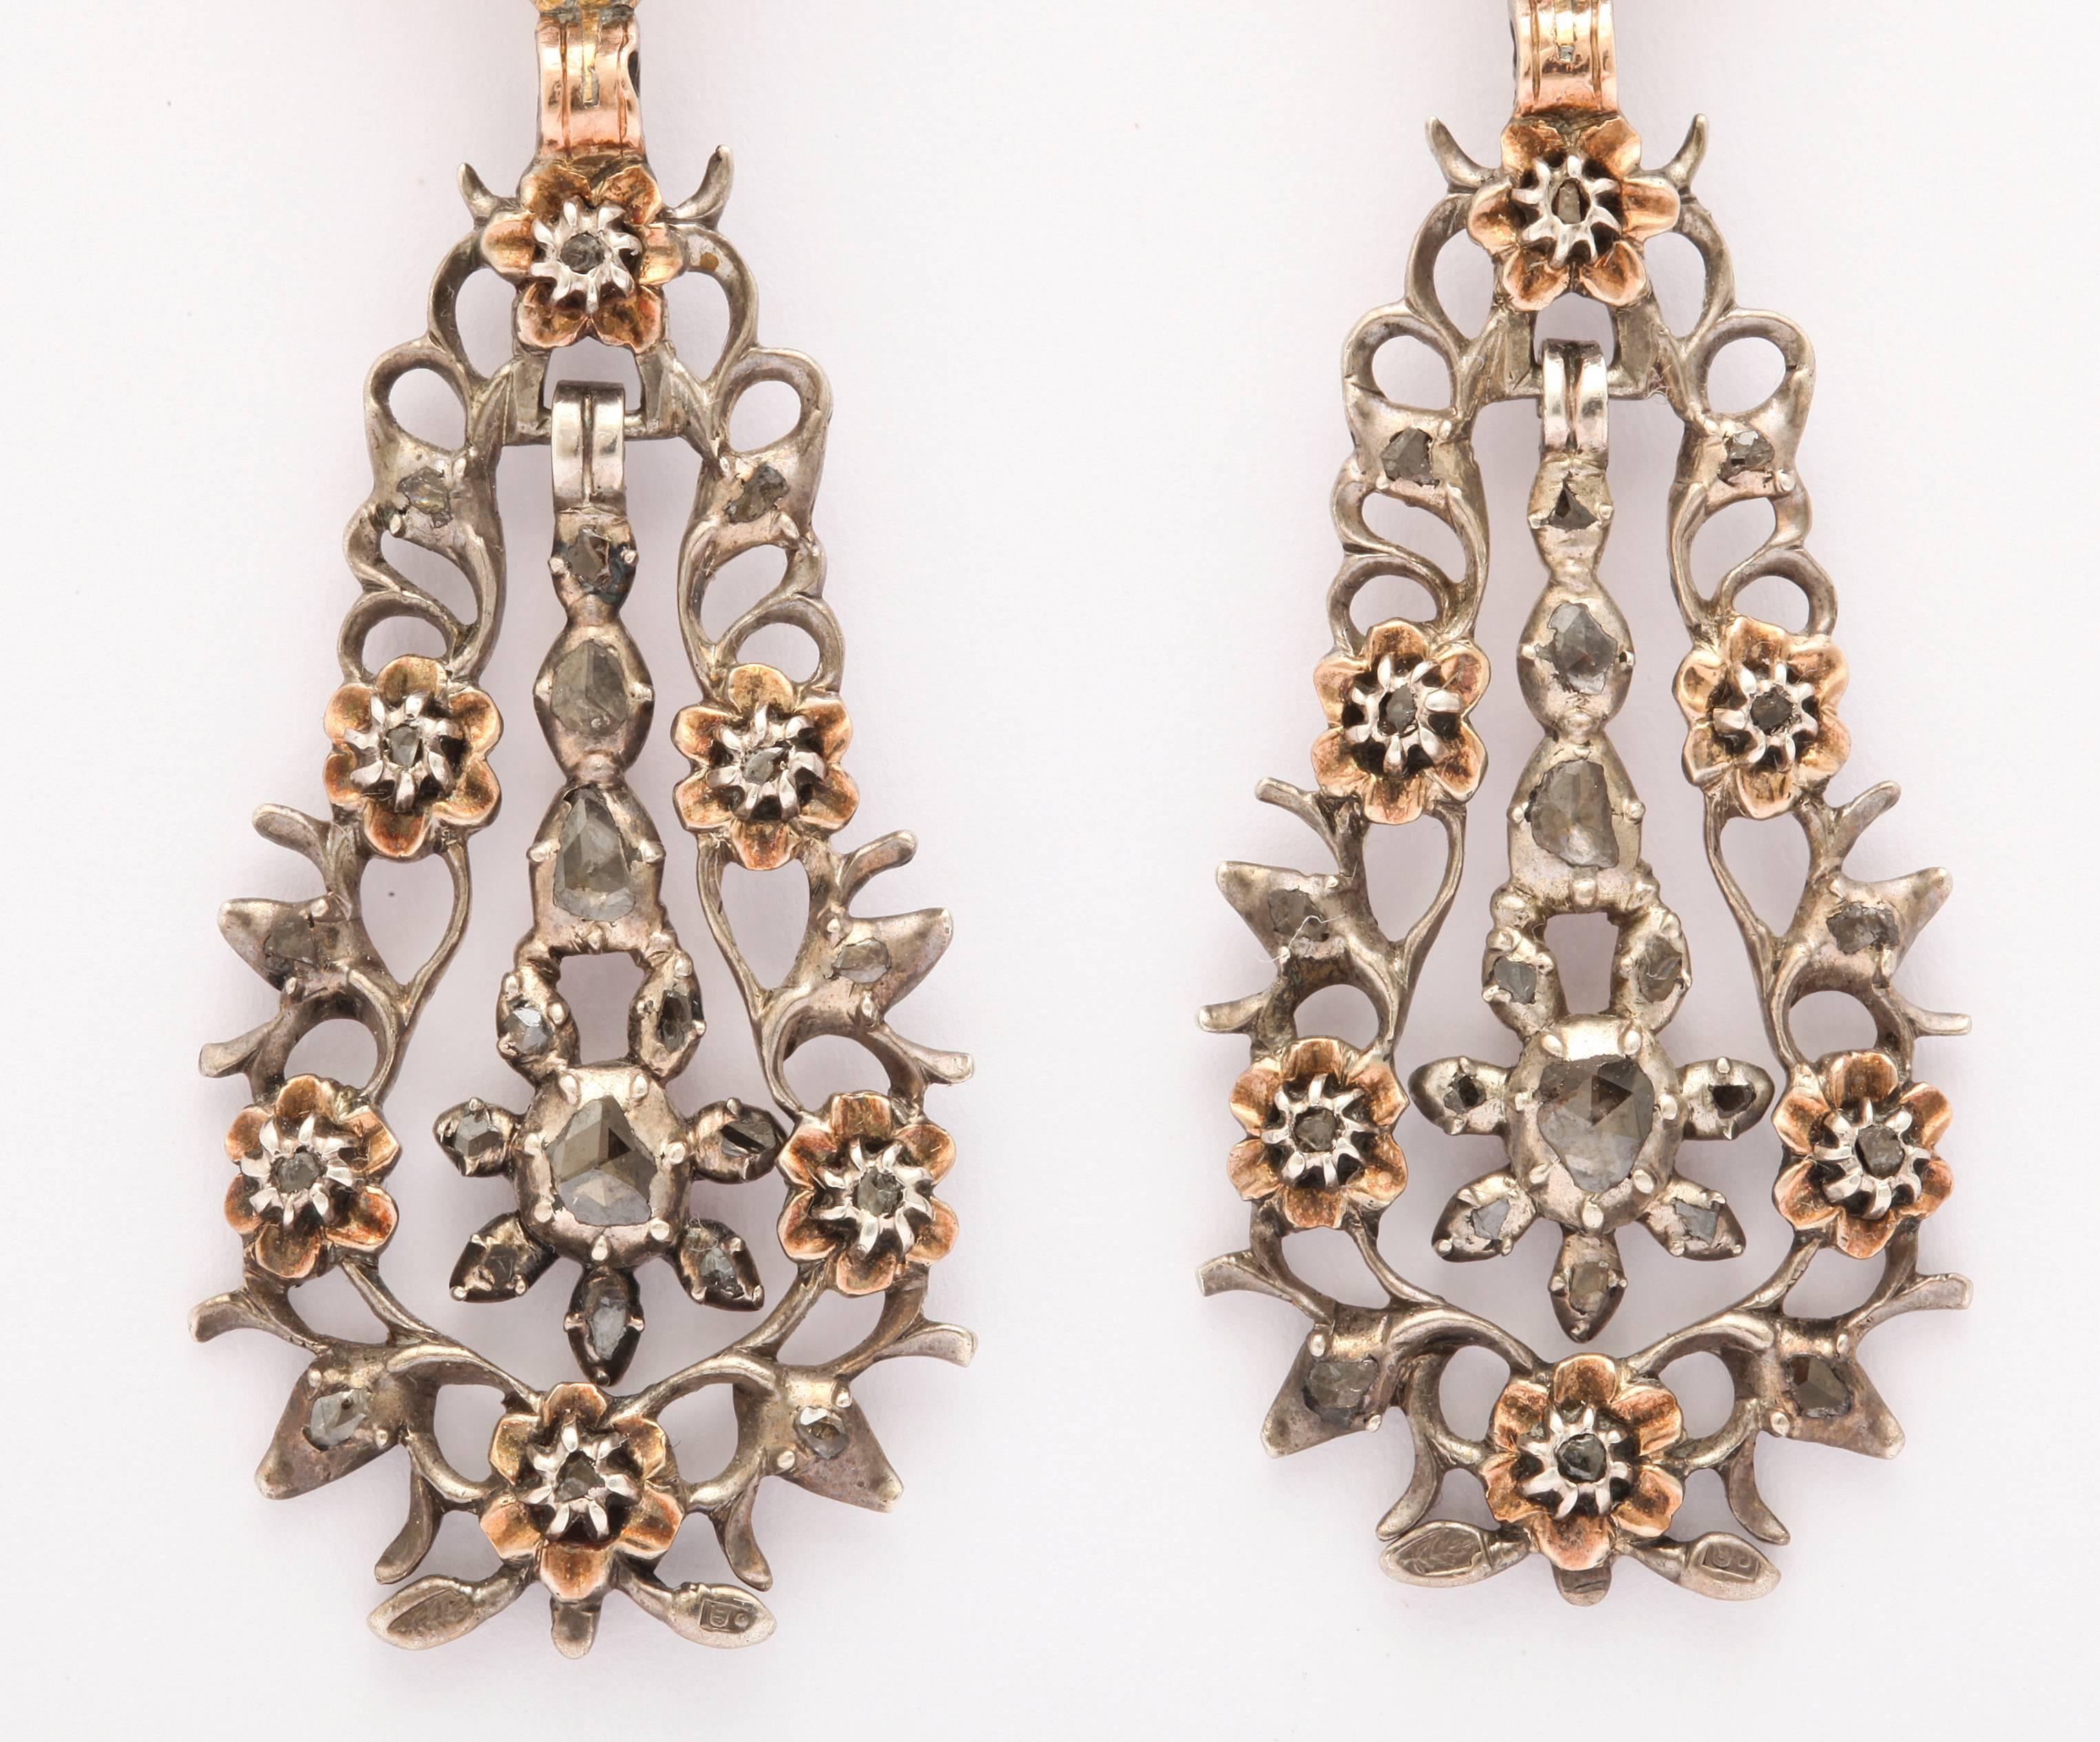 The diamonds are sparkling dewdrops throughout these lightweight, spiky, lacy Georgian earrings set with antique gems and punctuated with gold flowers. The flowers hold small diamonds in their center. This is one of a pair of the most luscious